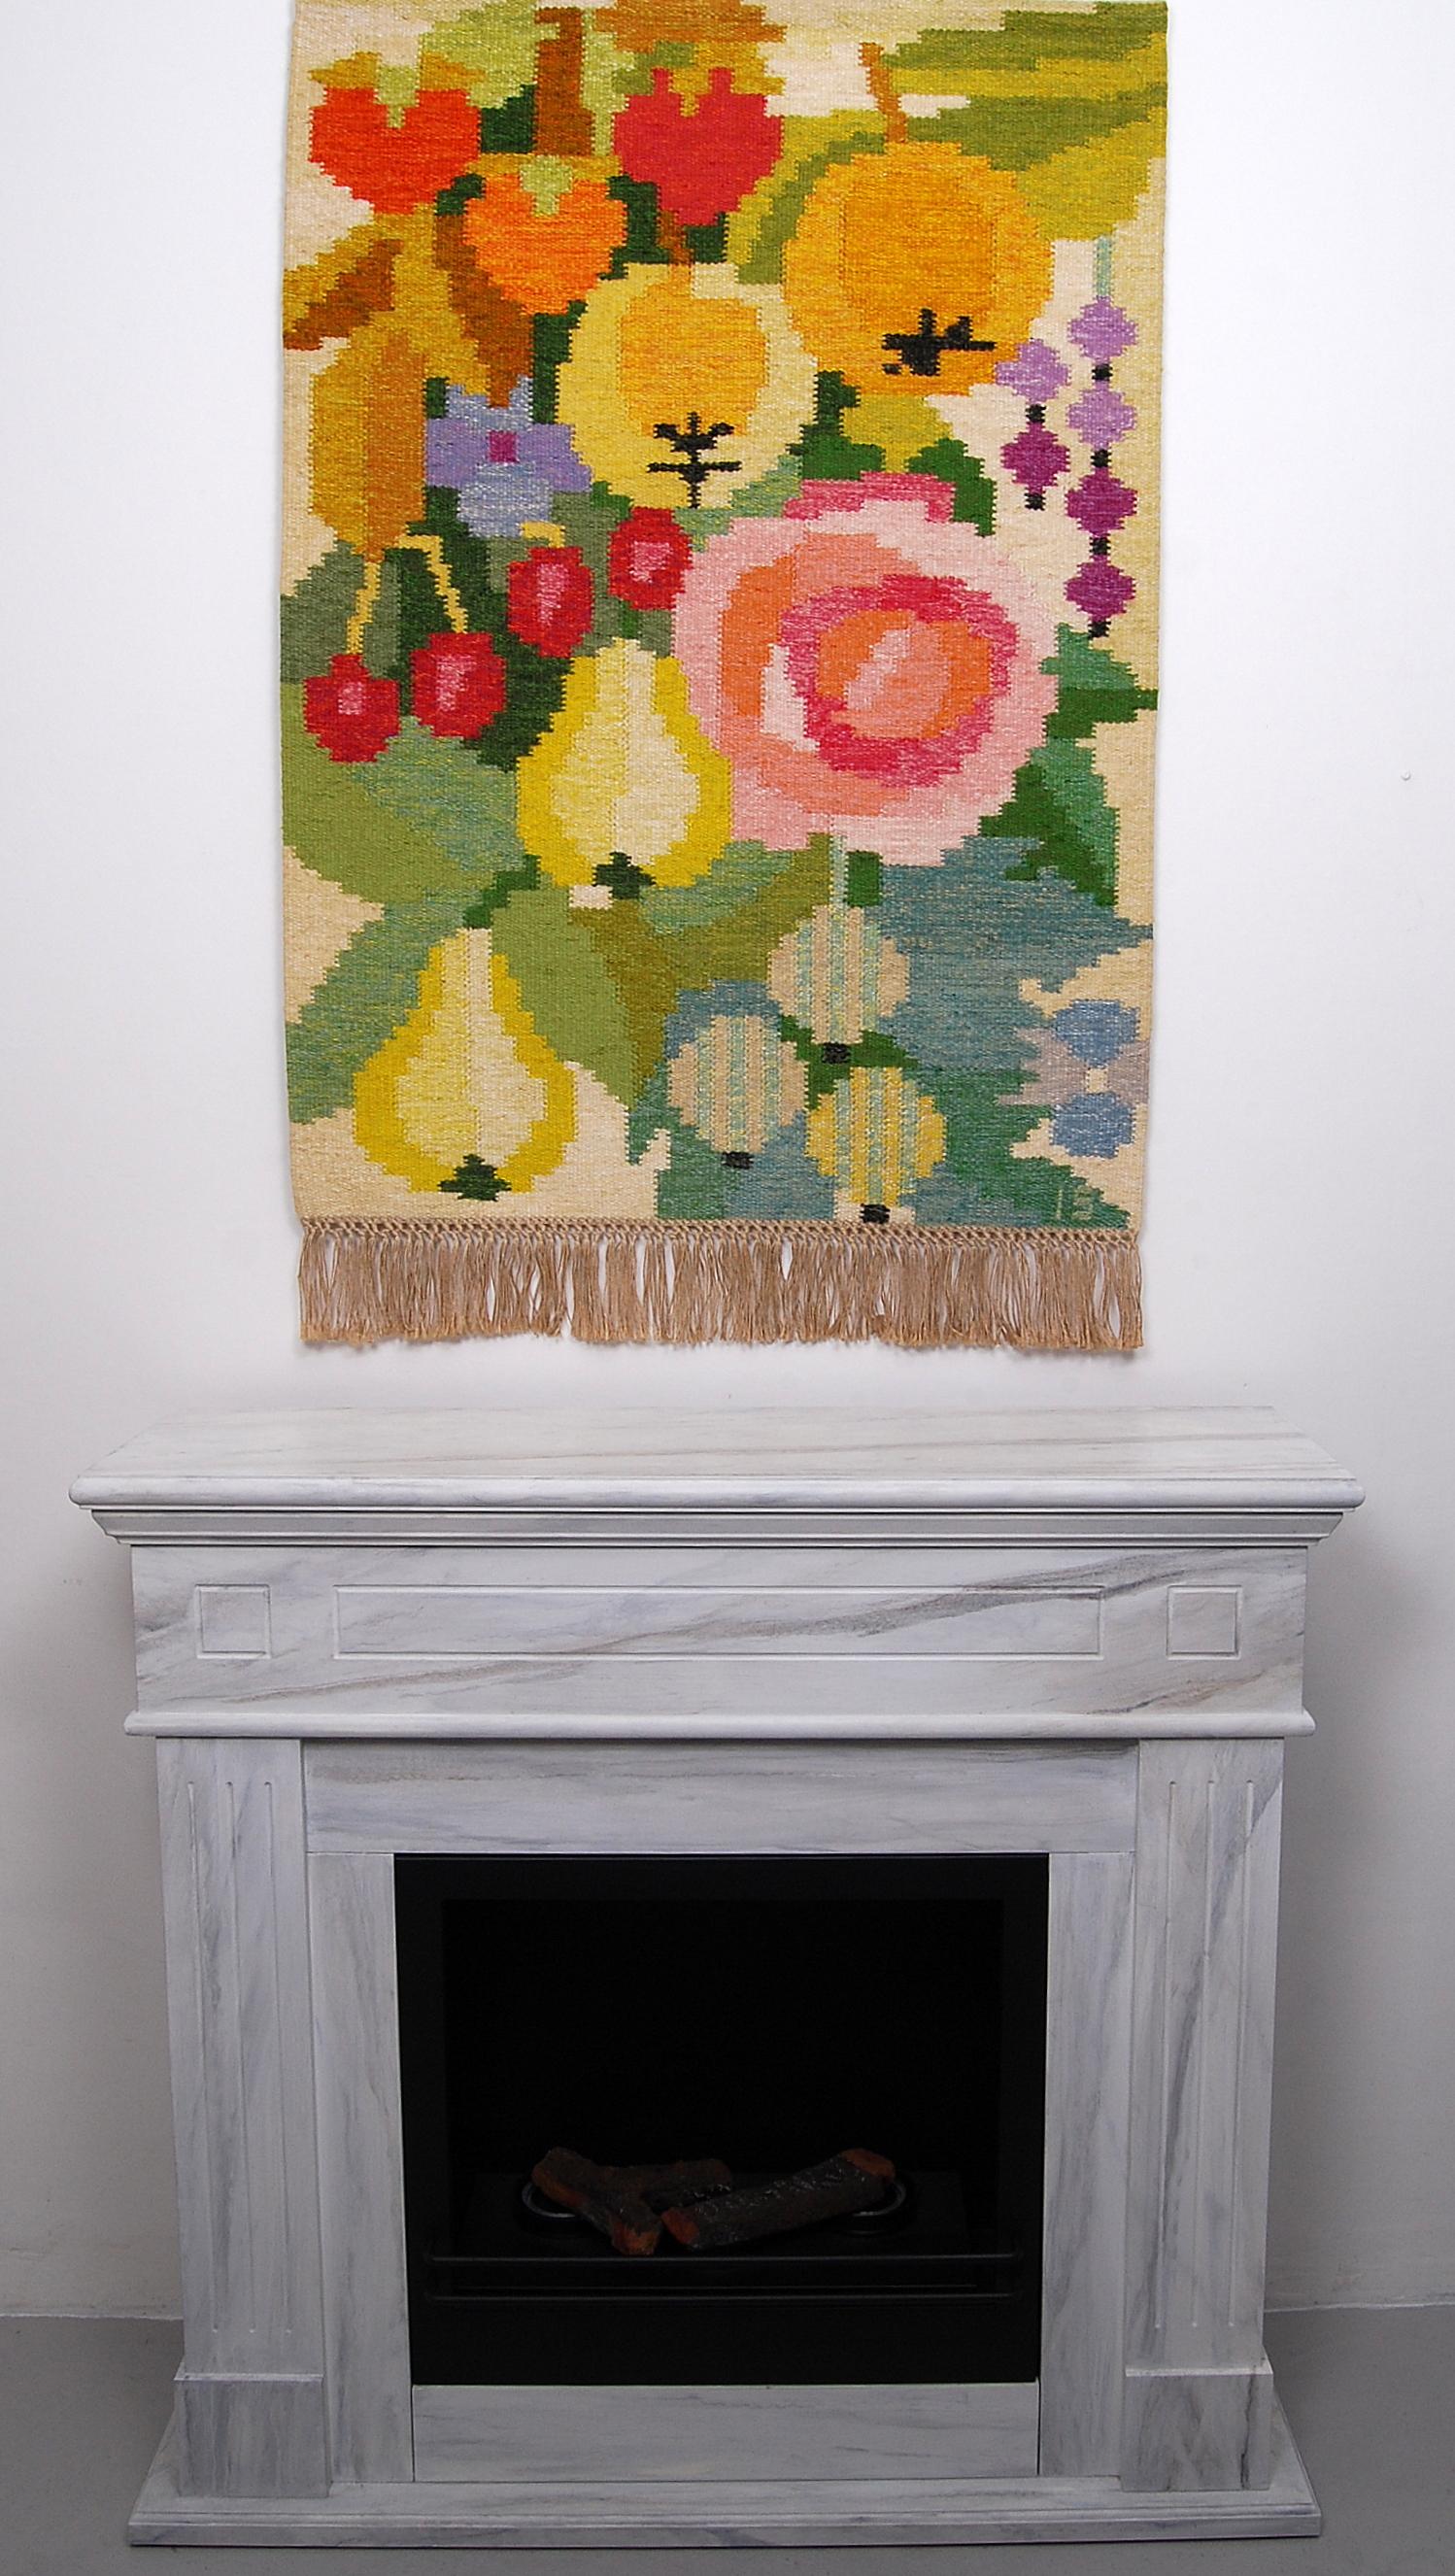 Handwoven kelim / rölakan wall tapestry ”Fruktträdgården” = Fruit garden by Ingegerd Silow. Signed IS in the right hand corner. Great bright original colours and fringe all in perfect condition. 



 